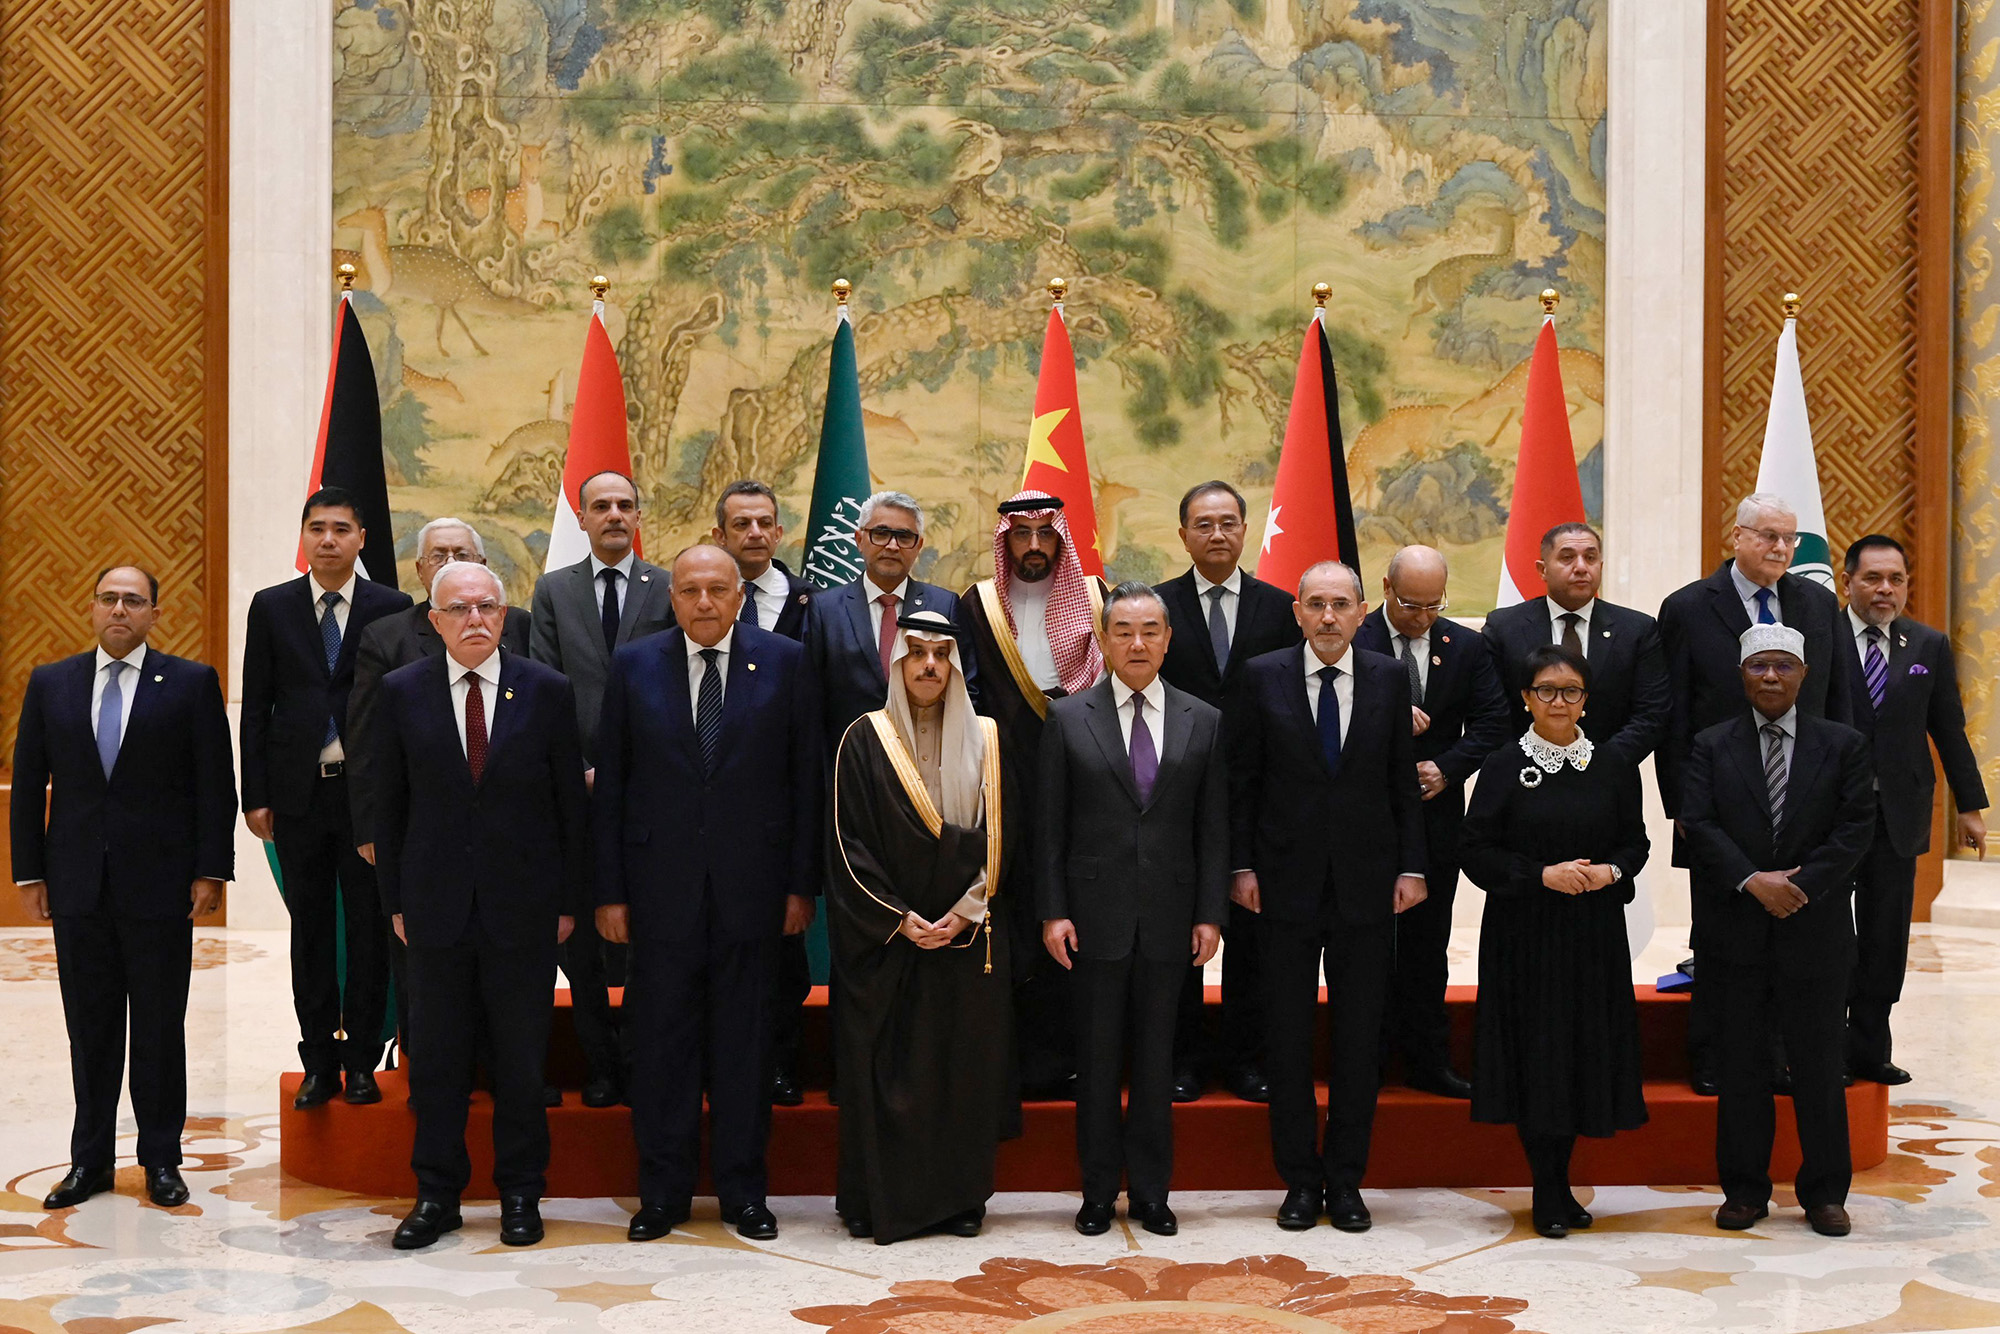 China's Foreign Minister Wang Yi (front row fourth right) poses for a group photo with officials from Saudi Arabia, Jordan, Egypt and Indonesia, as well as the Palestinian Foreign Minister and Organisation of Islamic Cooperation (OIC) Secretary-General before the meeting in Beijing on November 20.